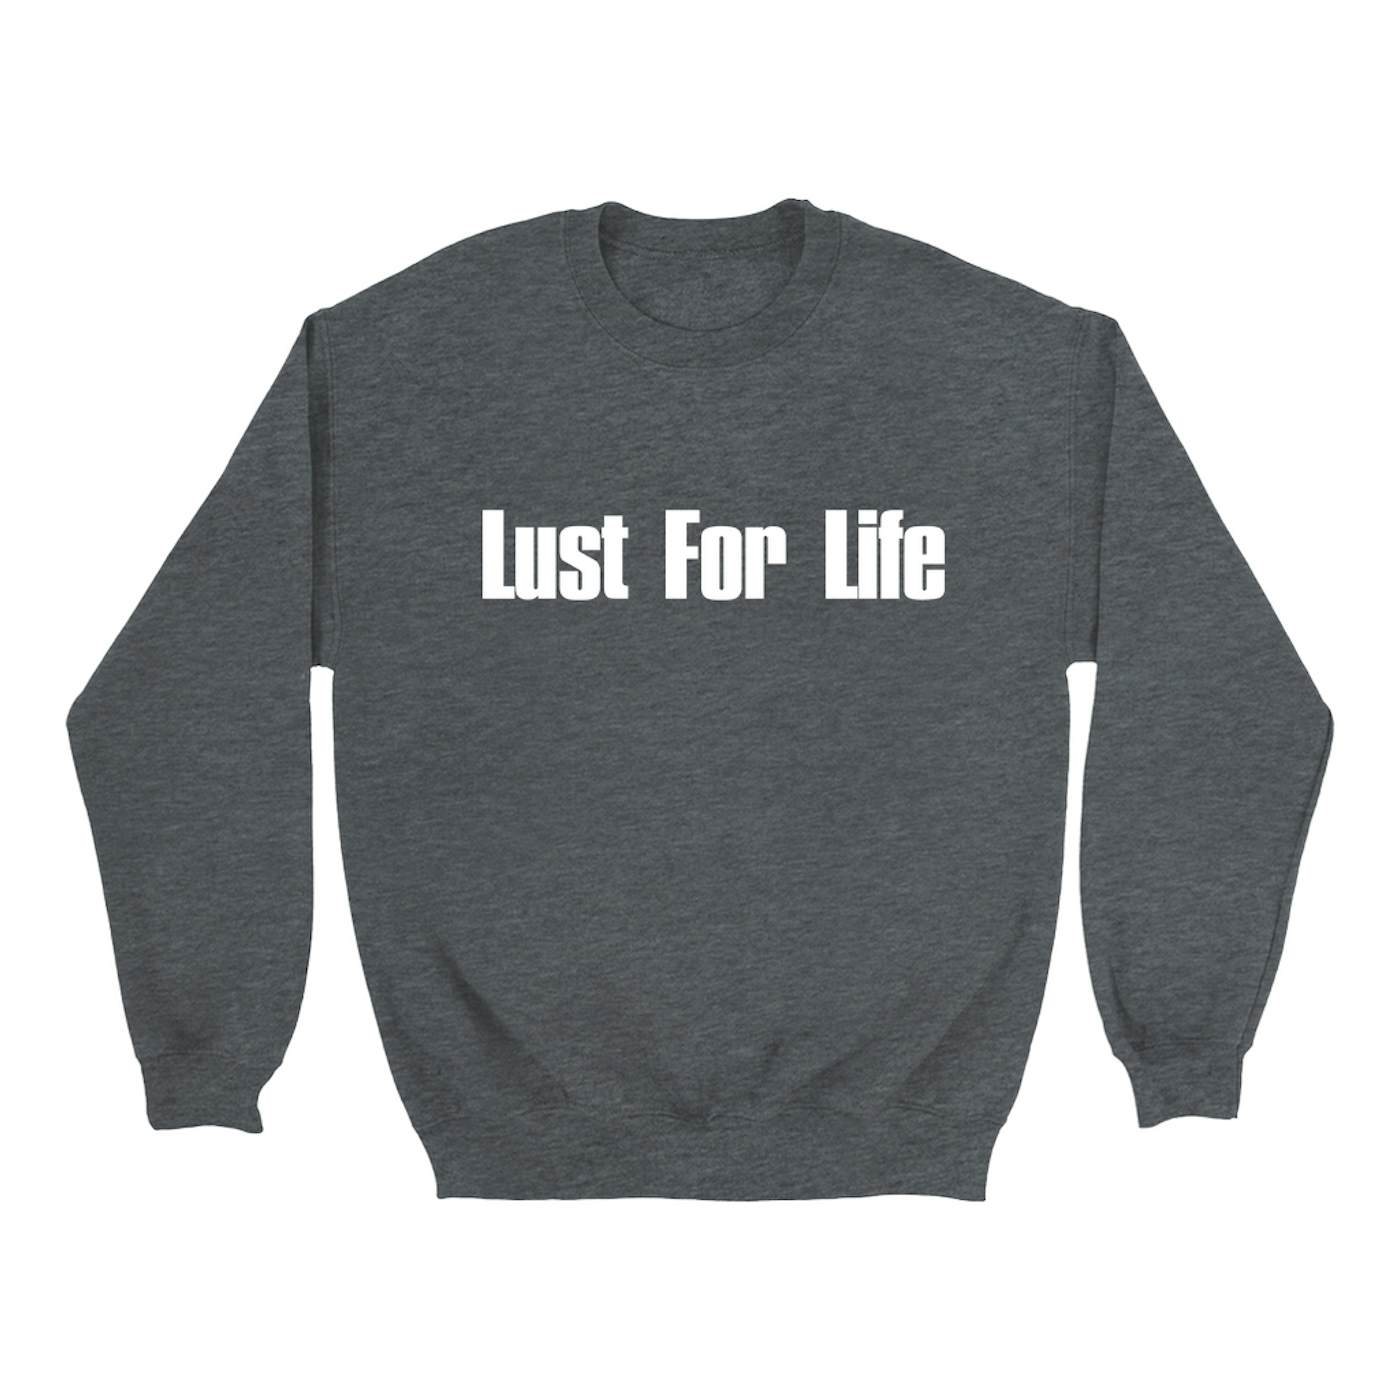 The Stooges Sweatshirt | Lust For Life Worn By Iggy Pop The Stooges Sweatshirt